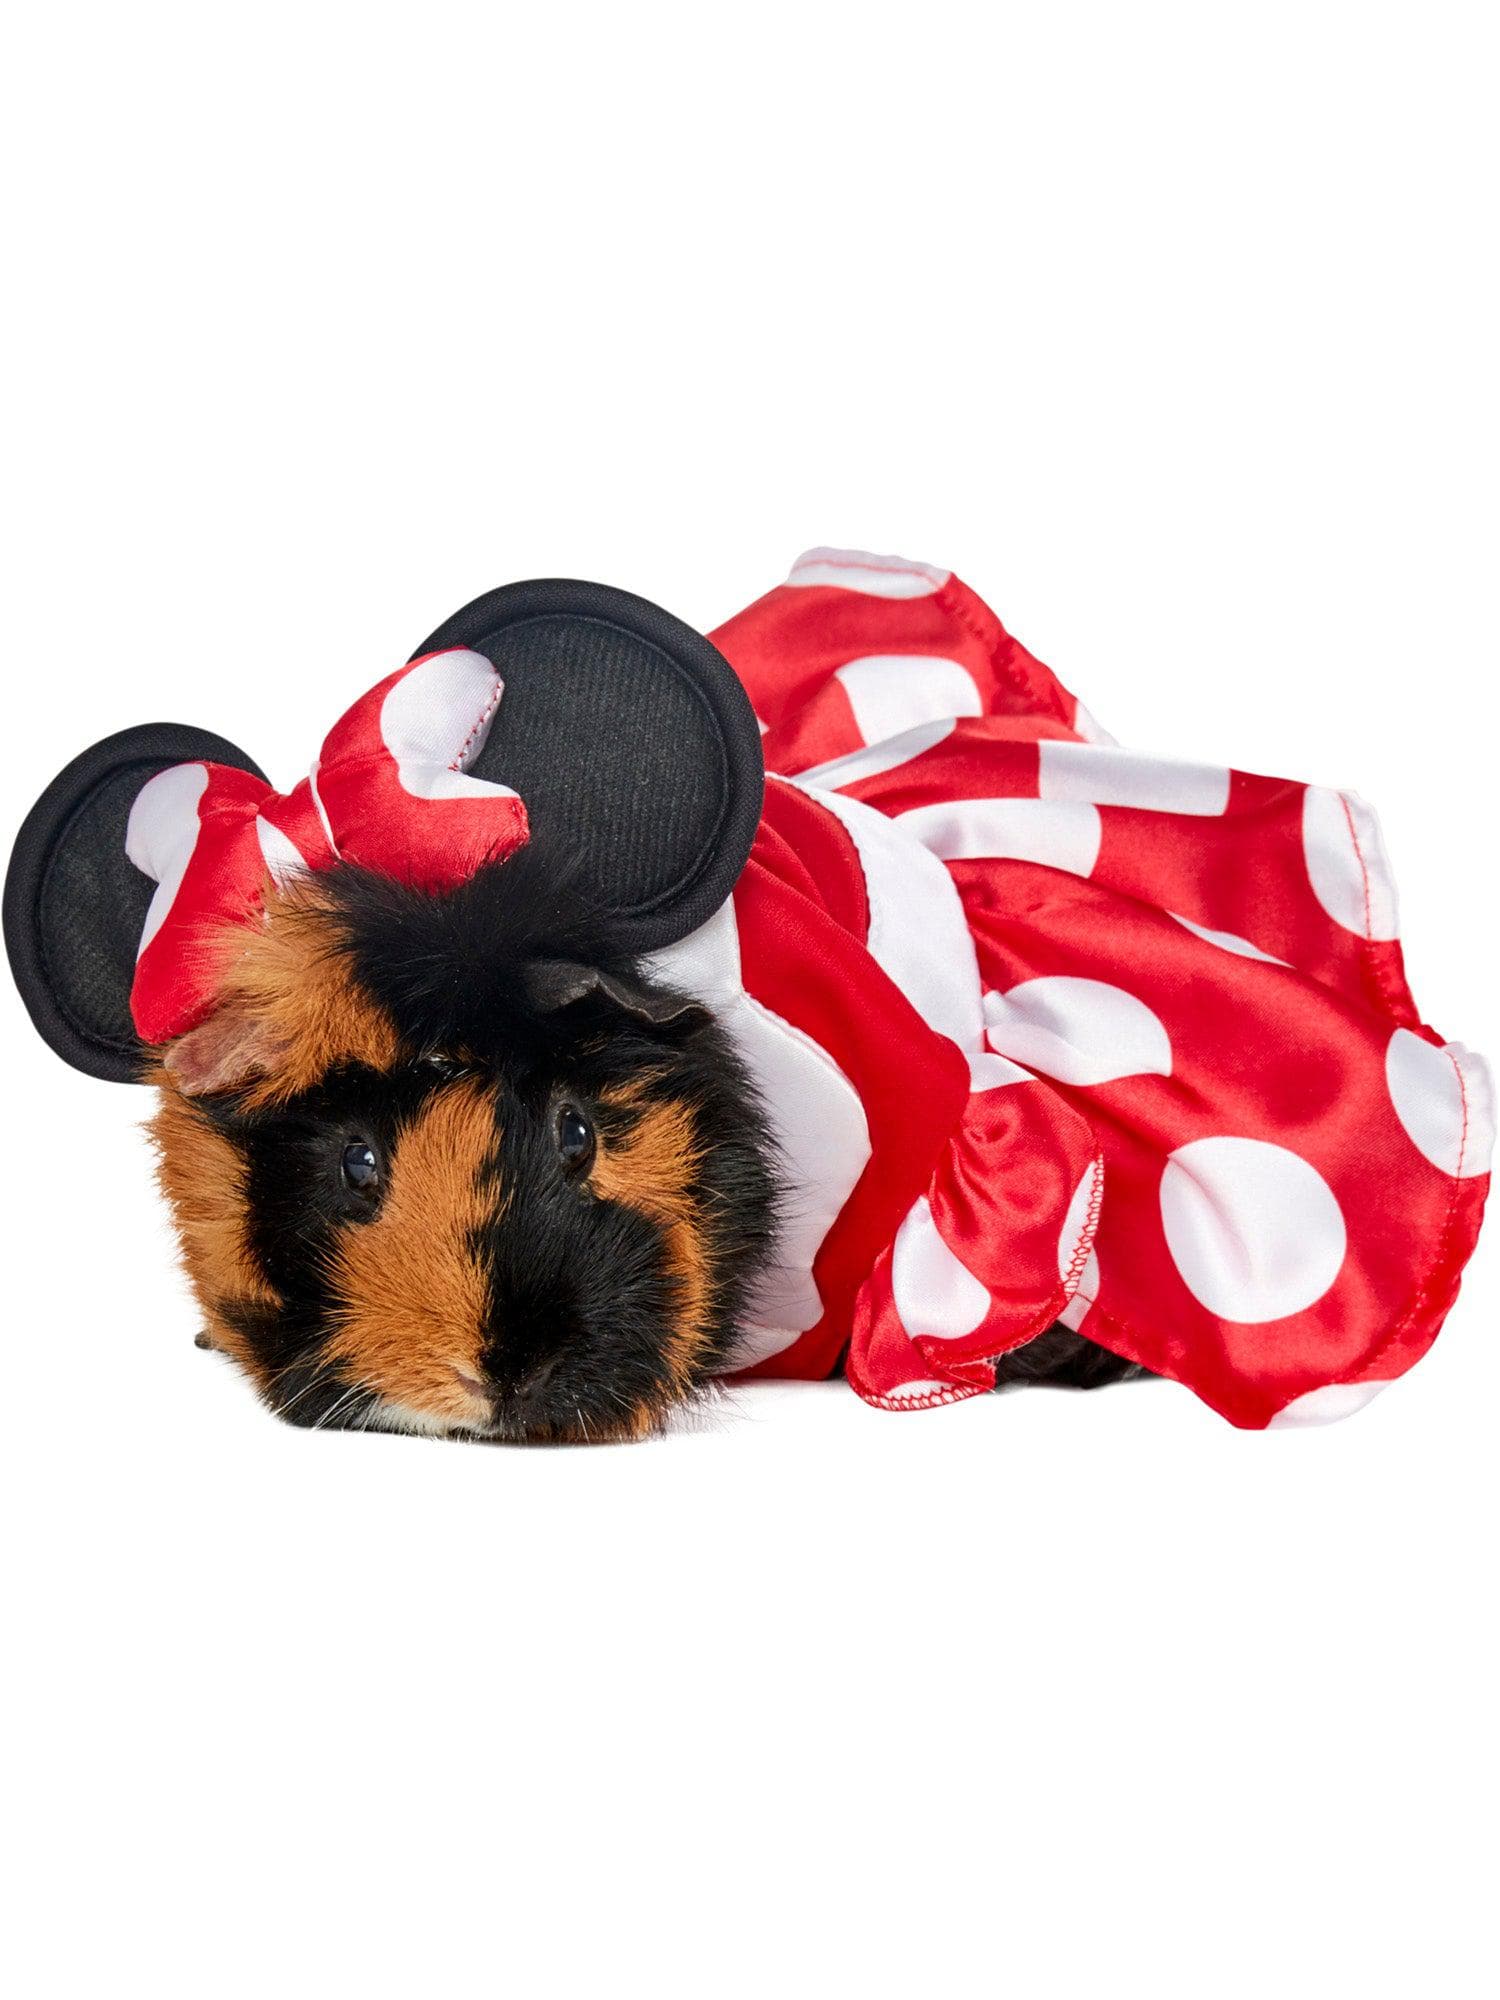 Minnie Mouse Small Pet Costume - costumes.com